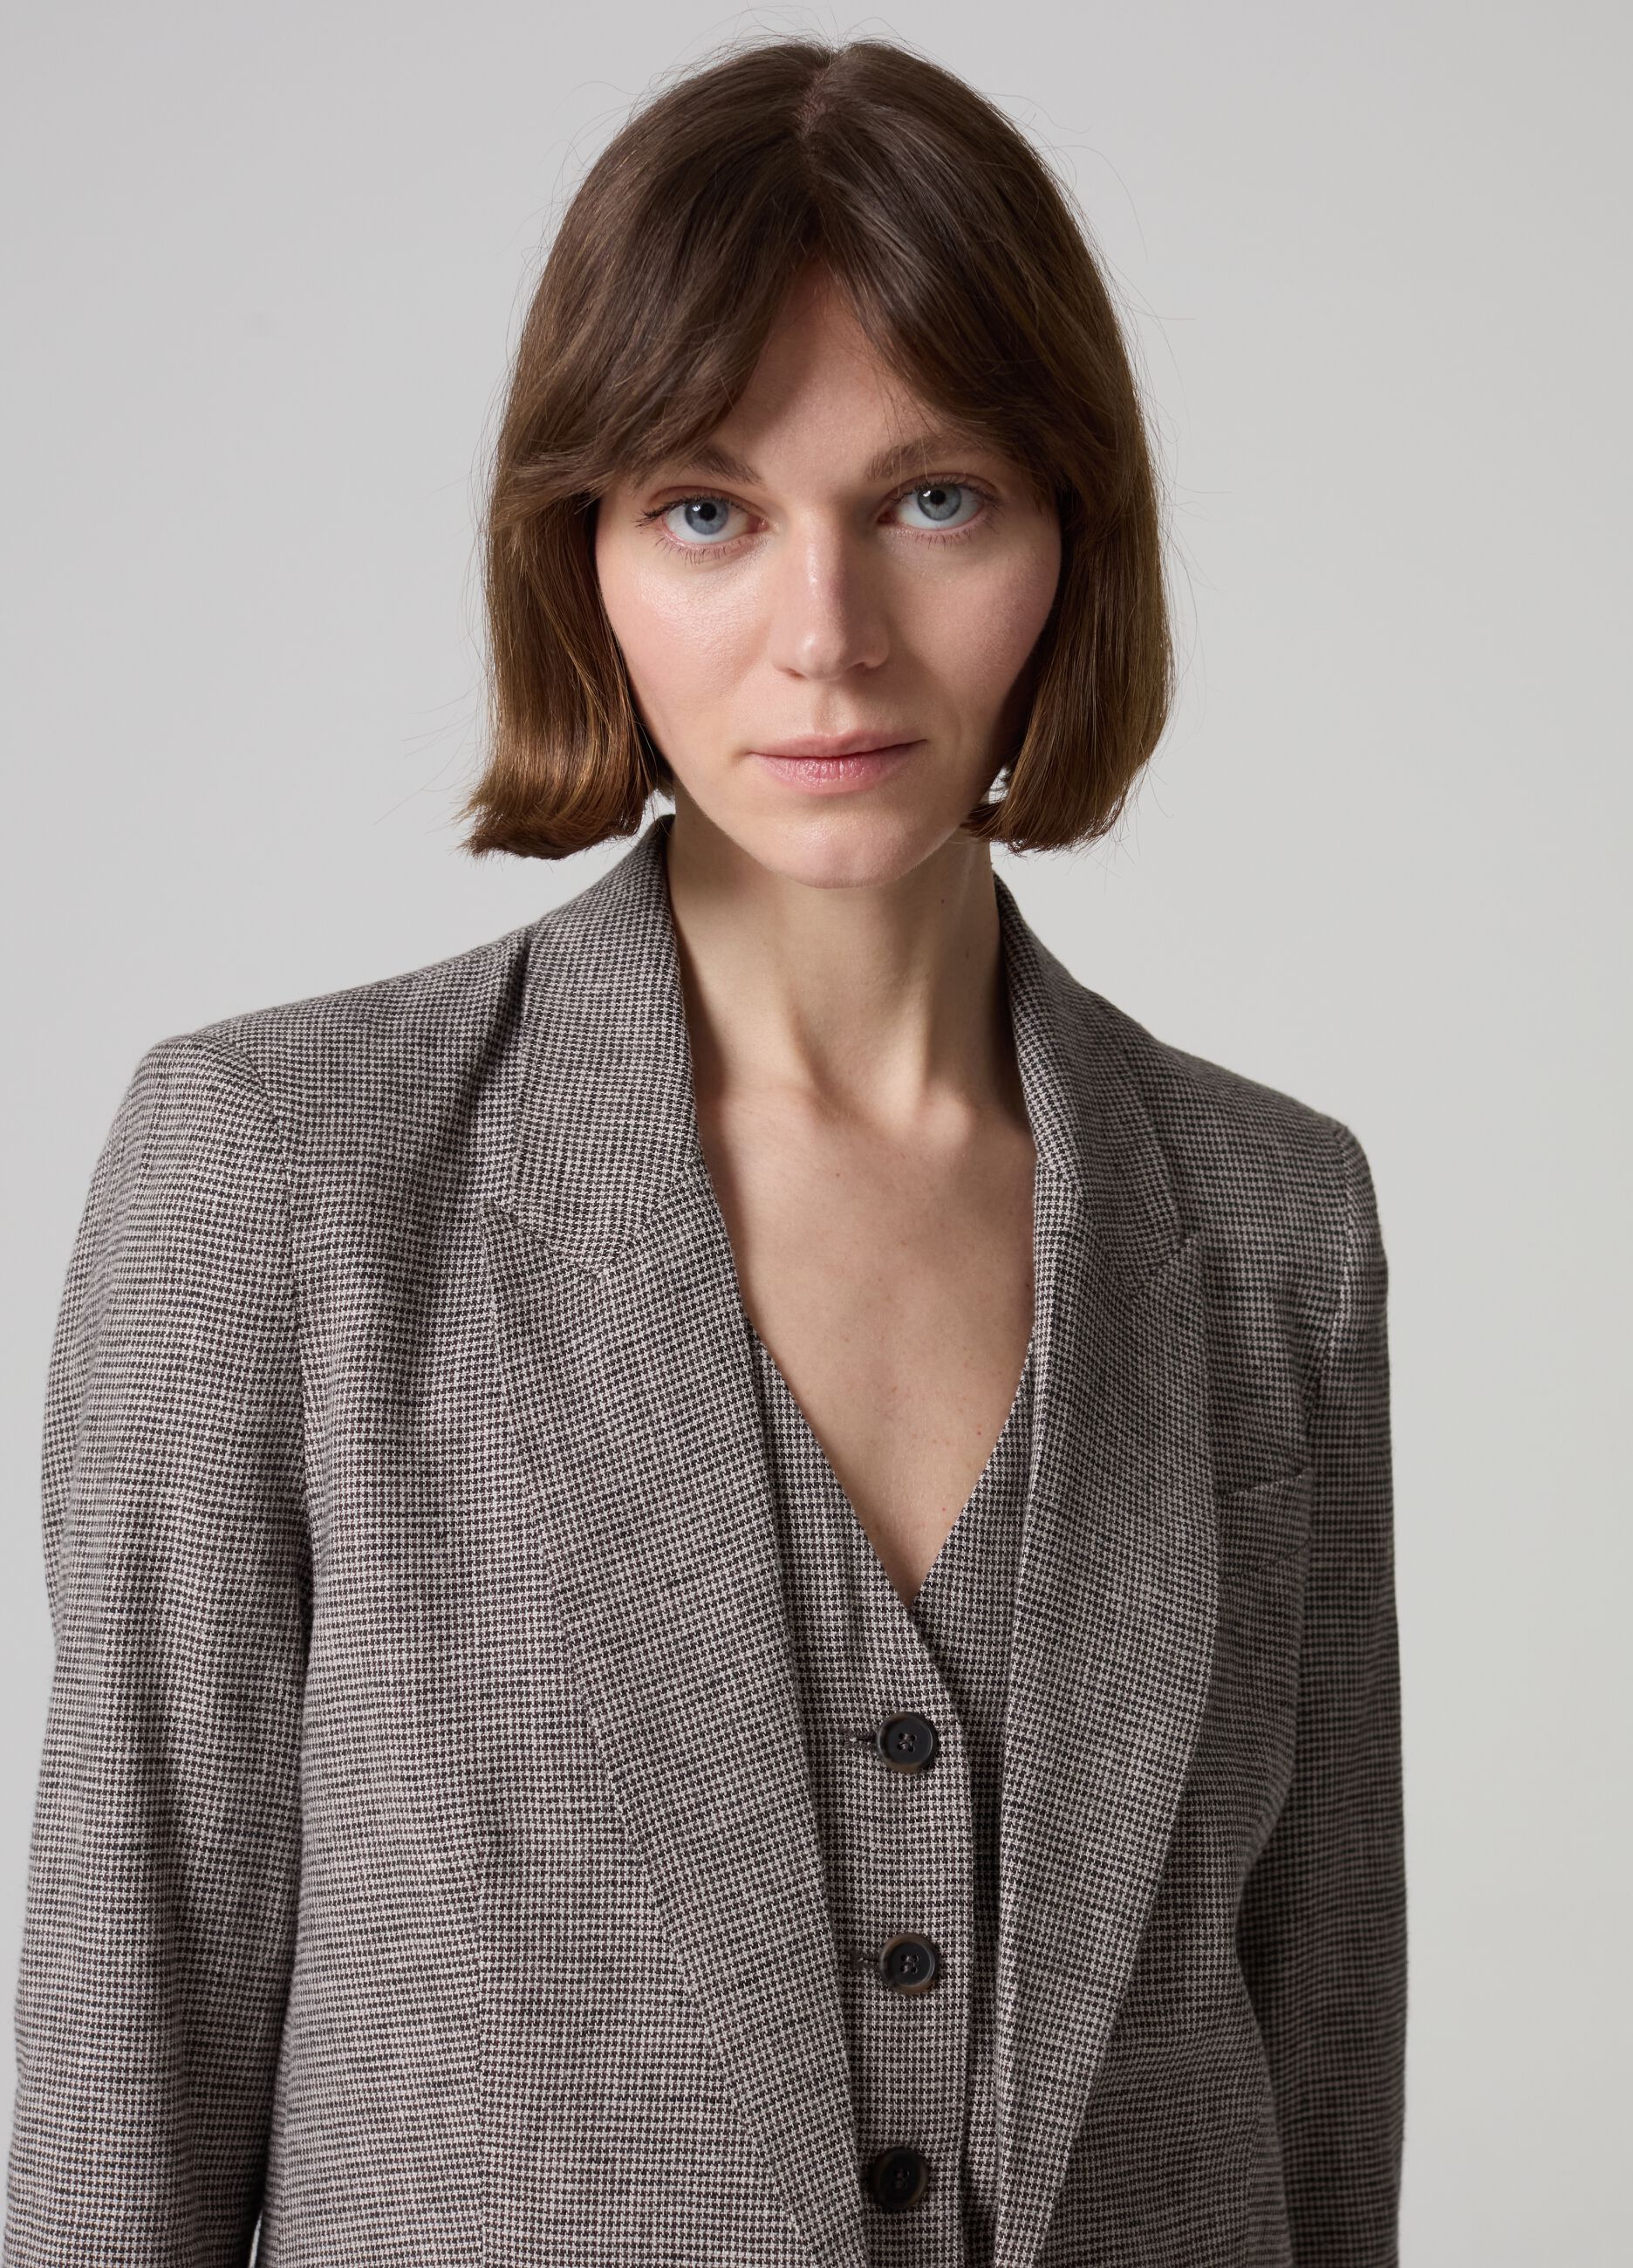 Contemporary single-breasted blazer with micro houndstooth pattern